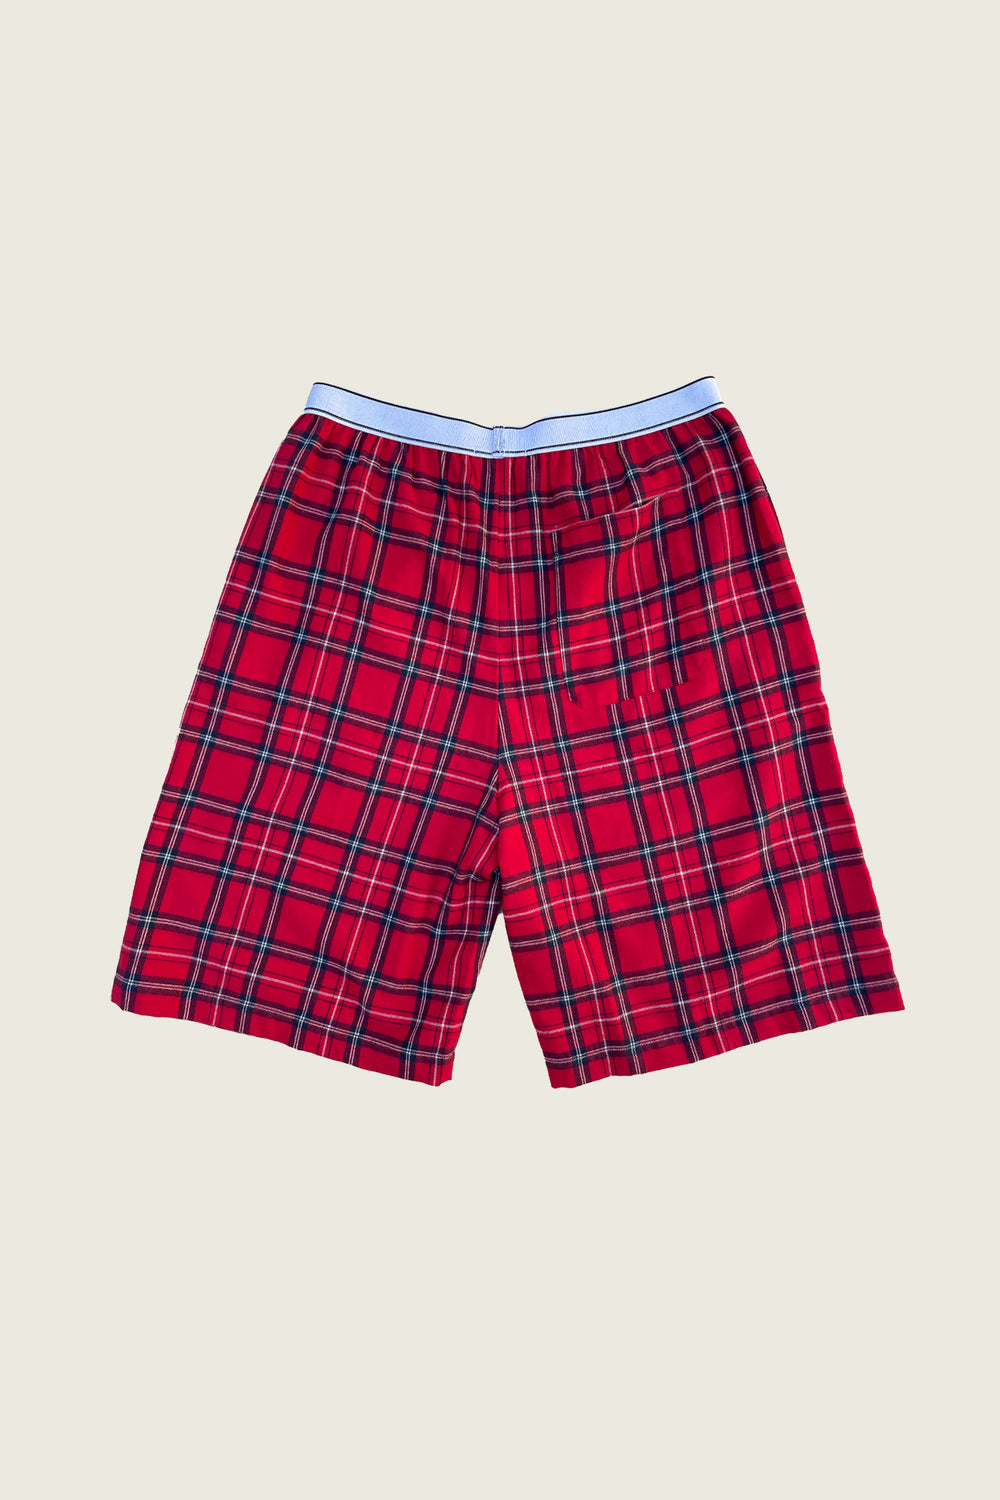 product-color-RED_TARTAN